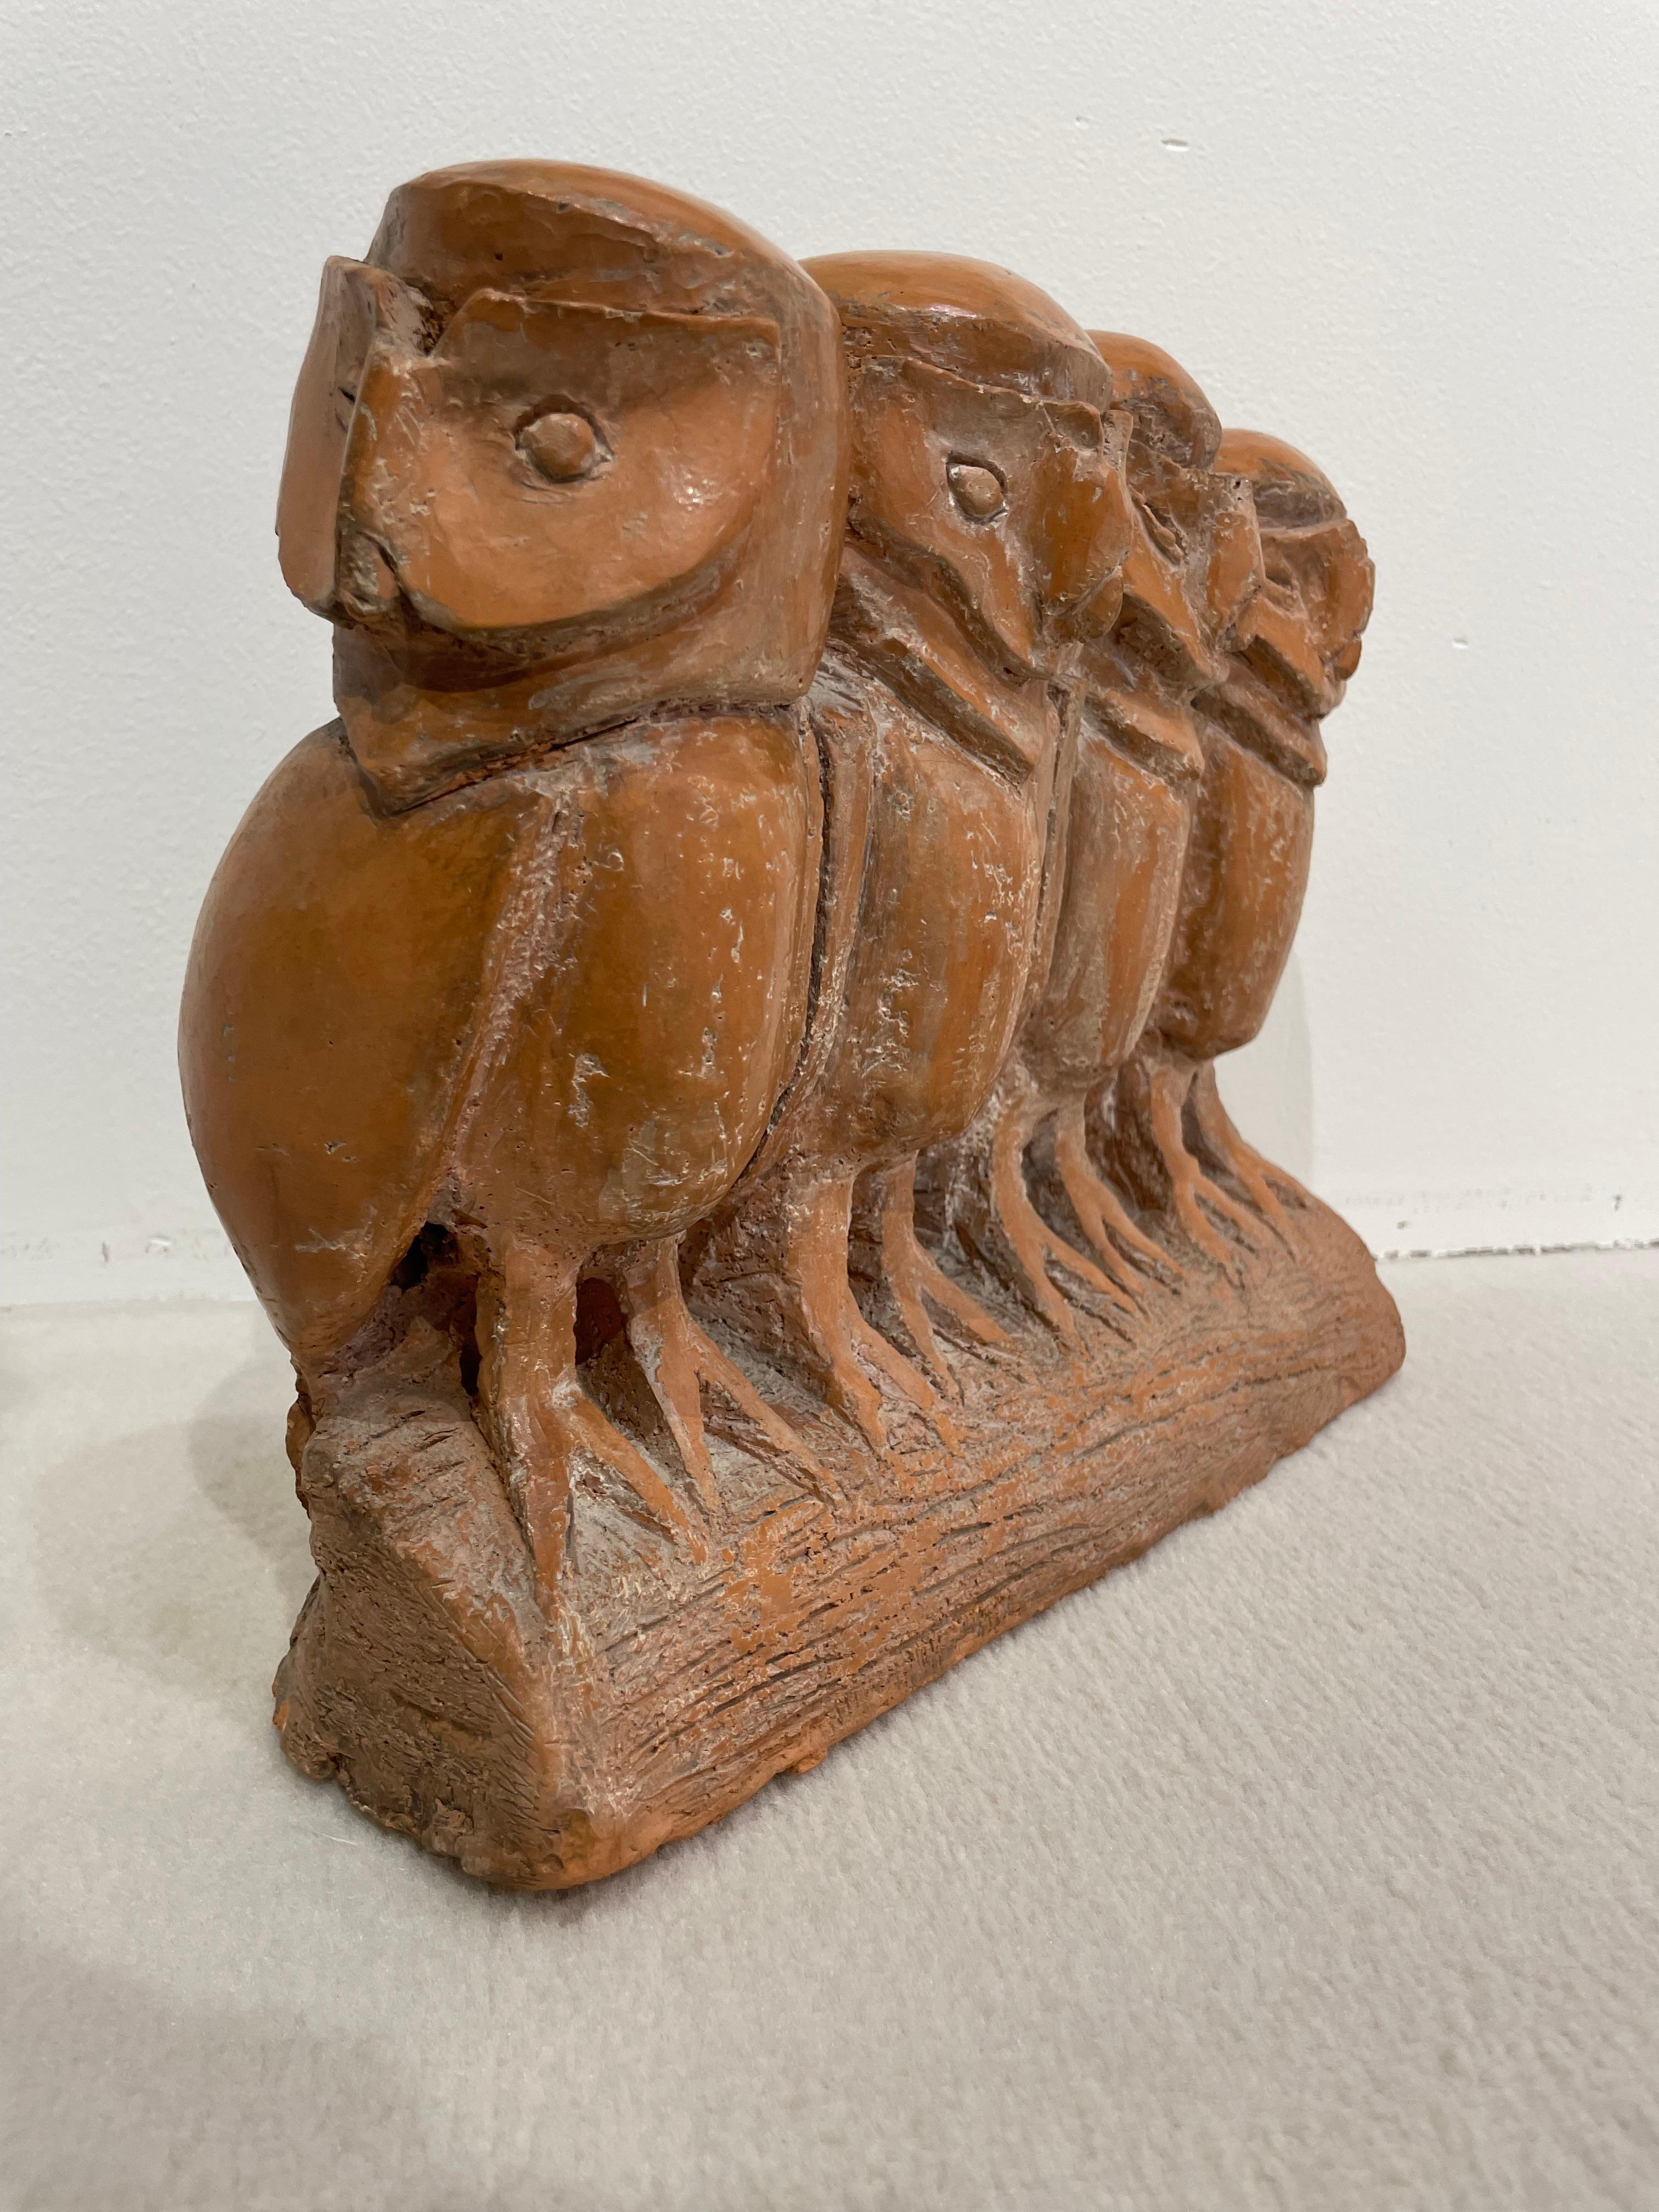 Terracotta sculpture representing four owls aligned on a thick branch and each showing a different expression. The mastery of the artist's work is accomplished
The stylized scope gives this object a unique character and reflects the style of the